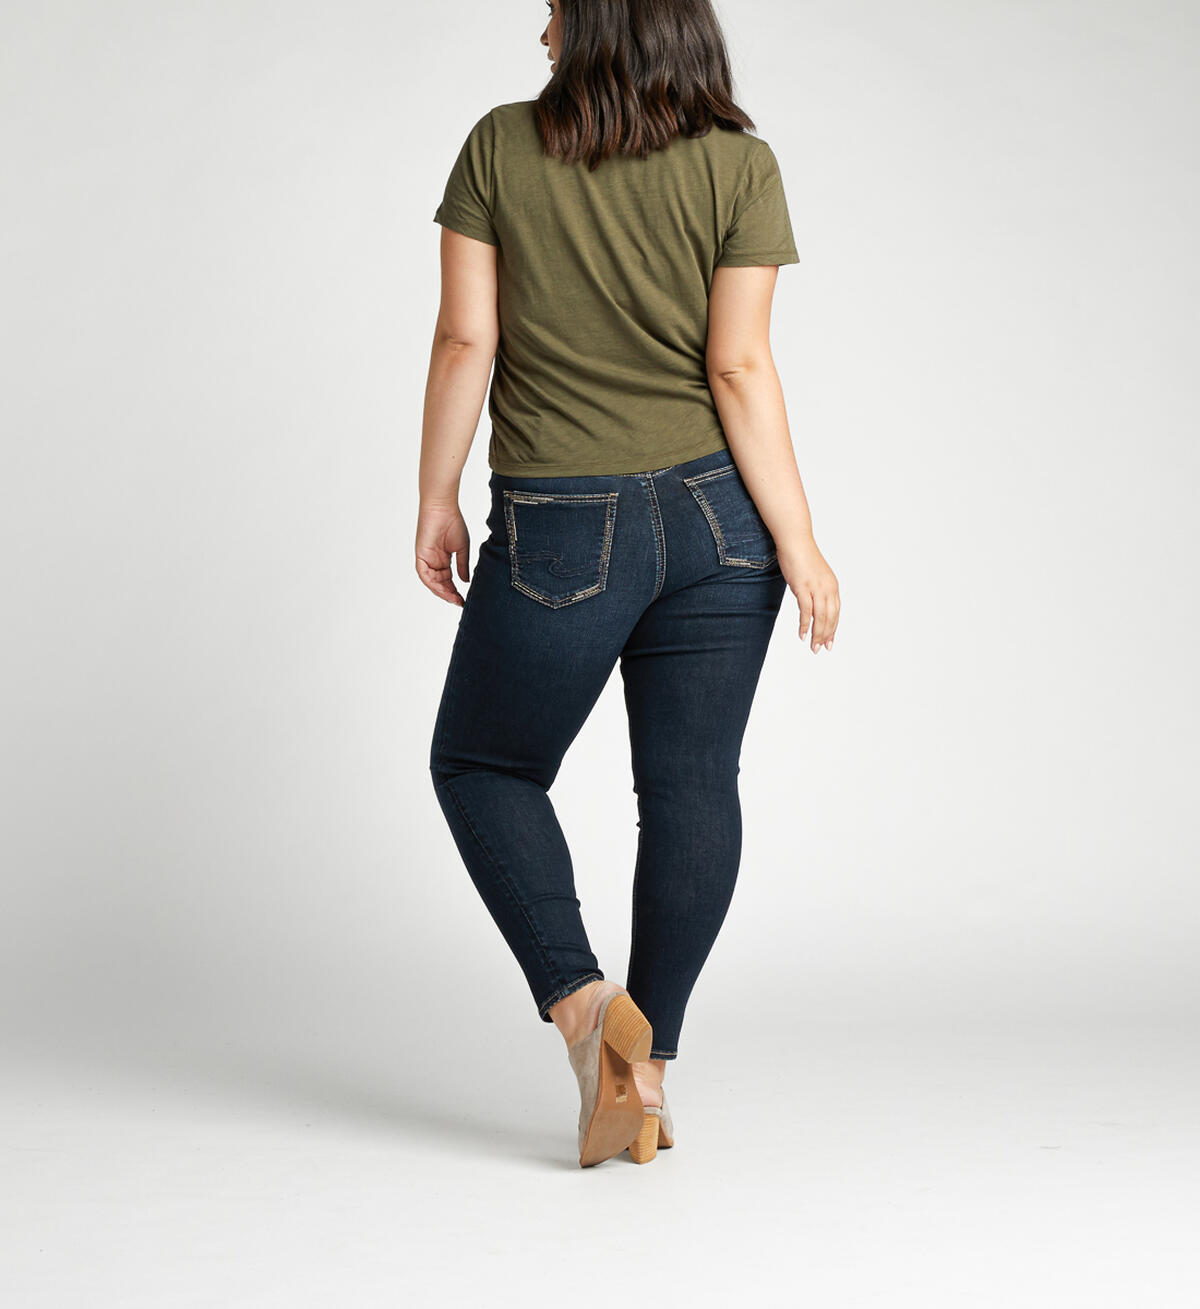 Avery High Rise Skinny Plus Size Jeans, , hi-res image number 1